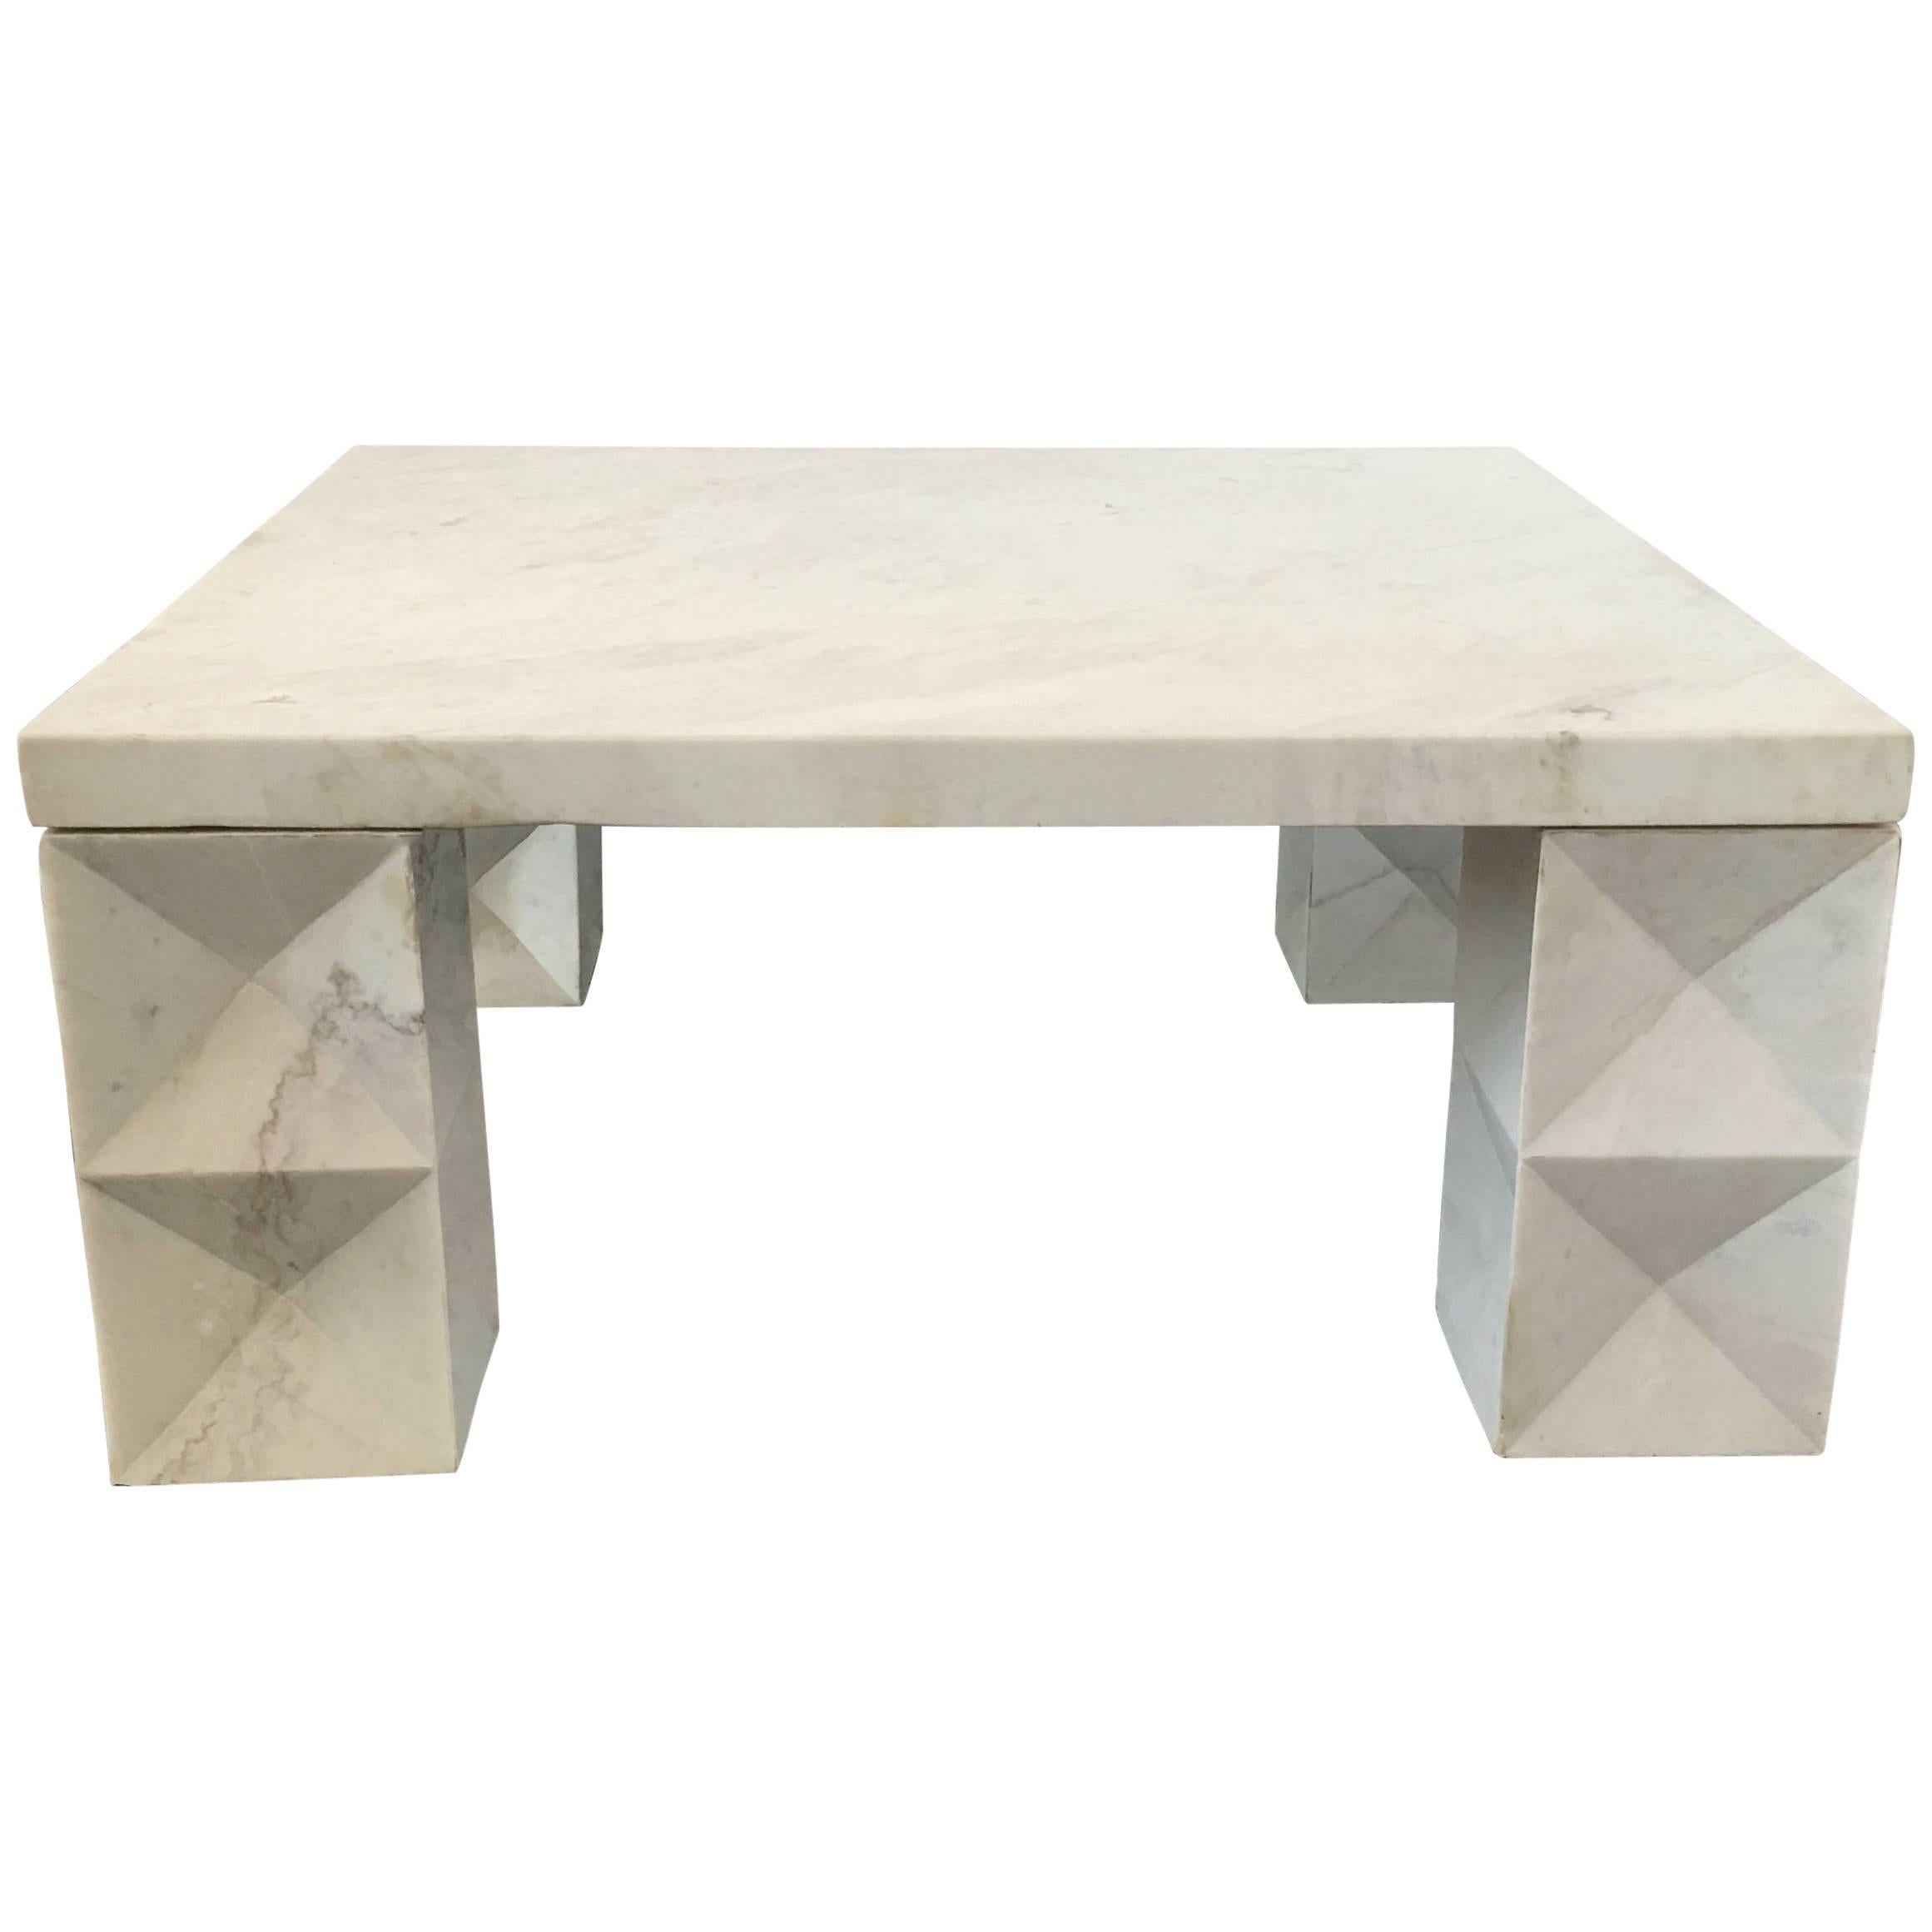 Modernist Coffee Table in Carrara Marble